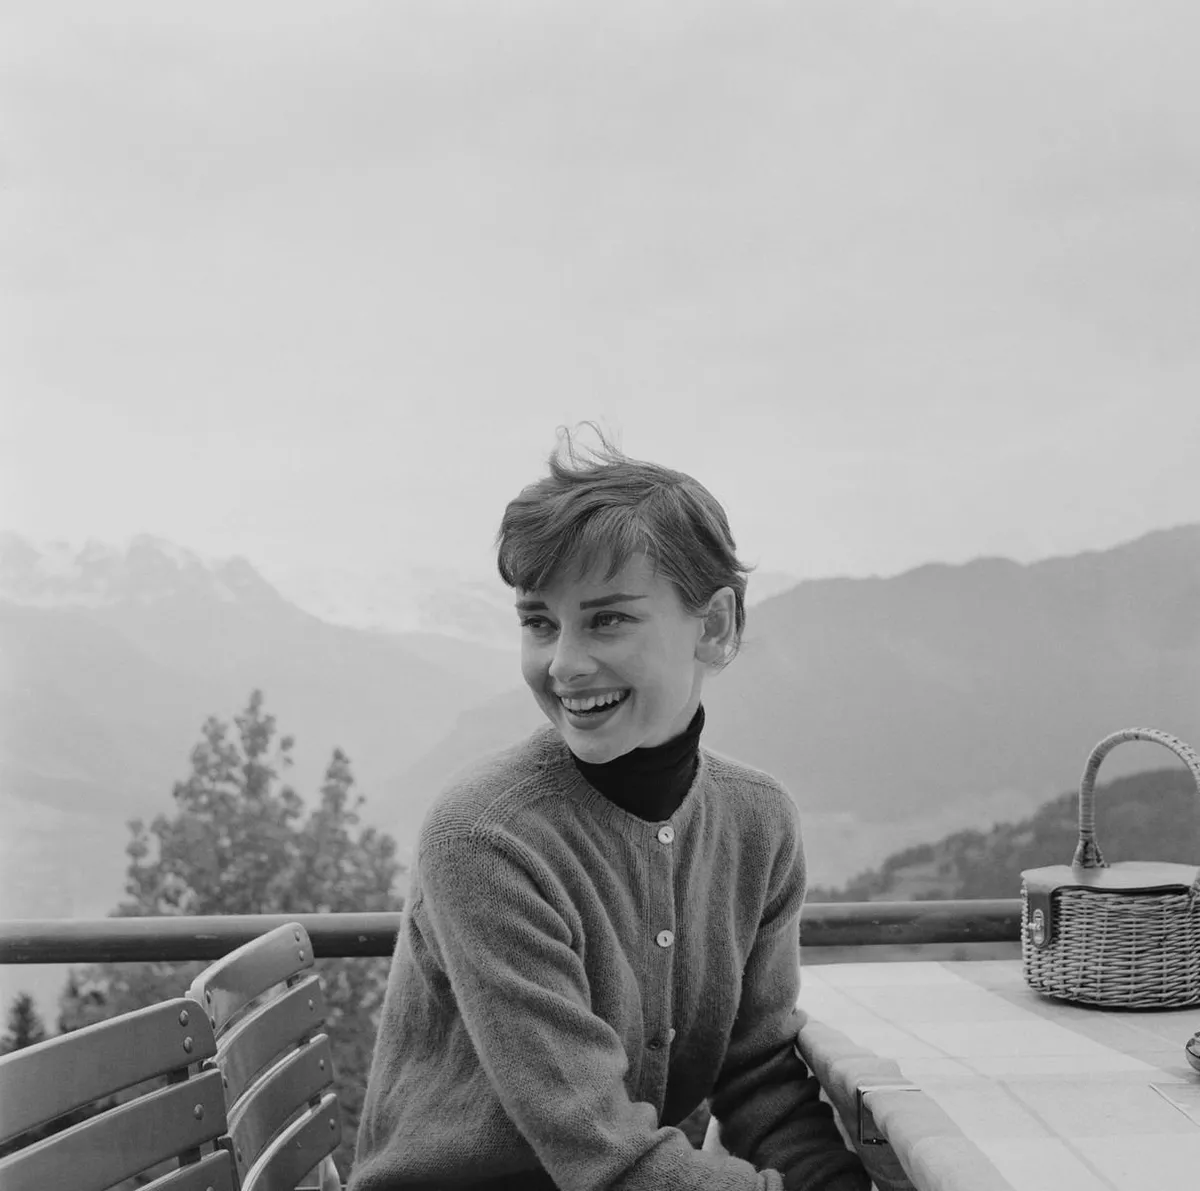 Belgian-born actress Audrey Hepburn (1929 - 1993) on the terrace of the Restaurant Hammetschwand at the summit of the Bürgenstock on January 01, 1955 | Photo: Getty Images